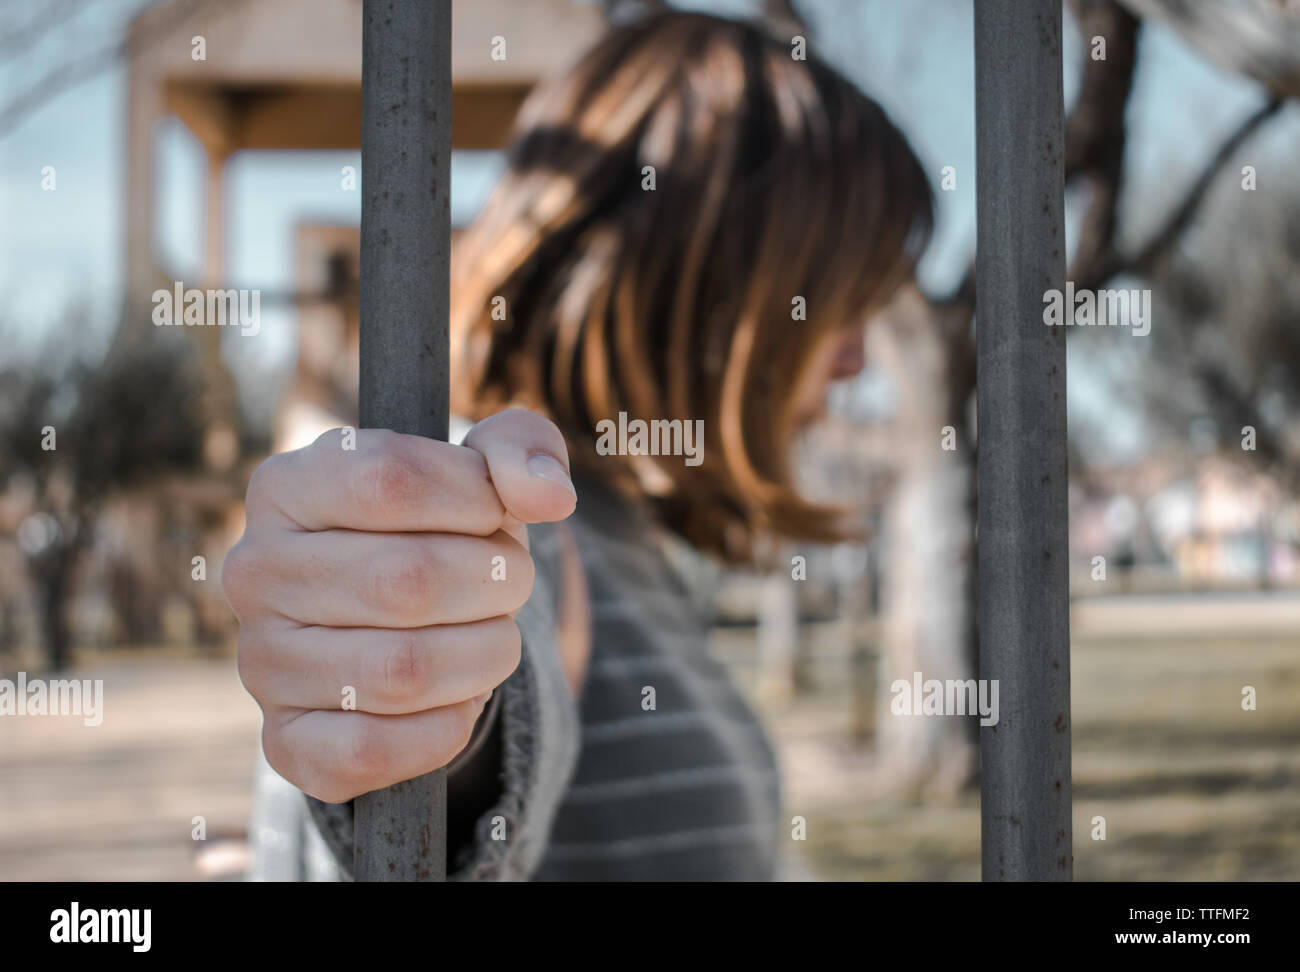 Woman's hands and bars. Stock Photo